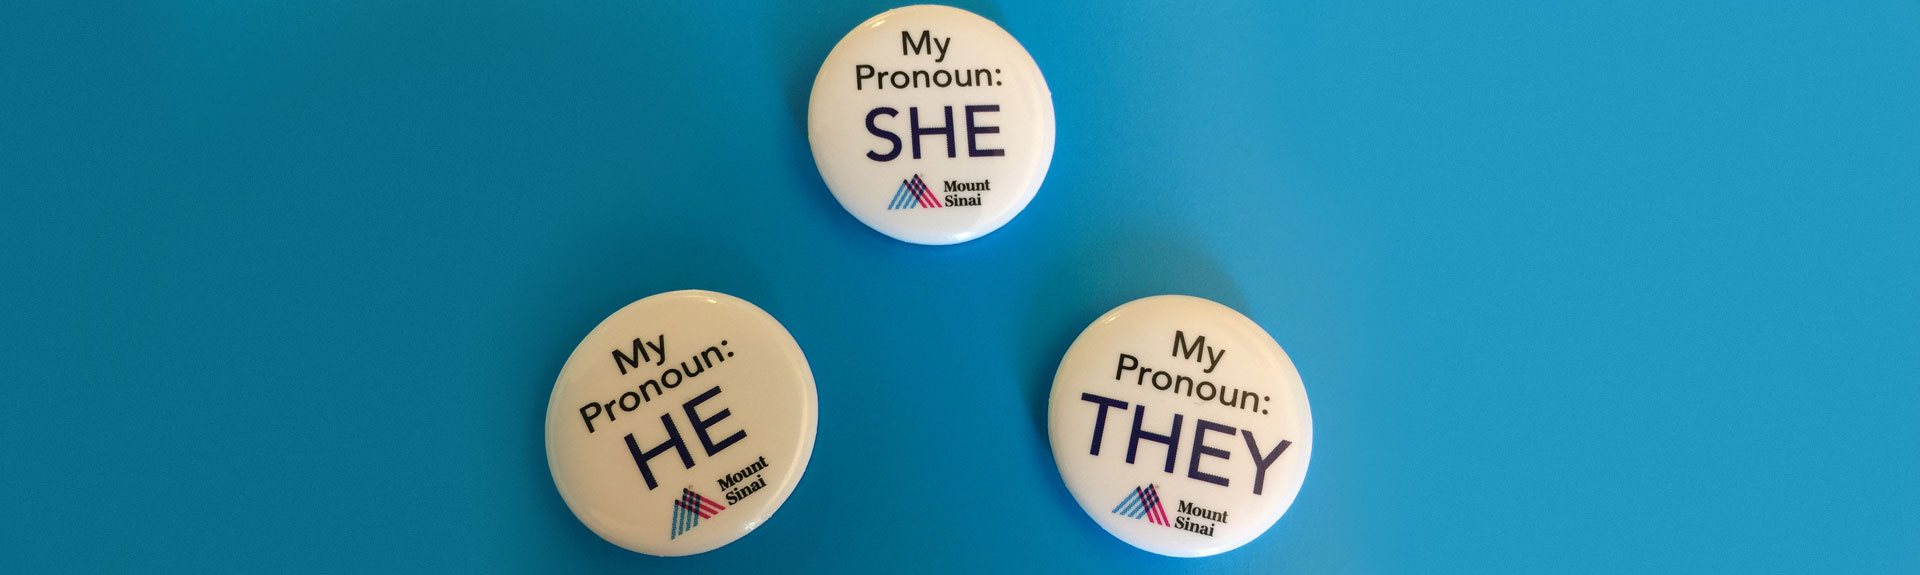 Buttons with She, He, and They pronouns